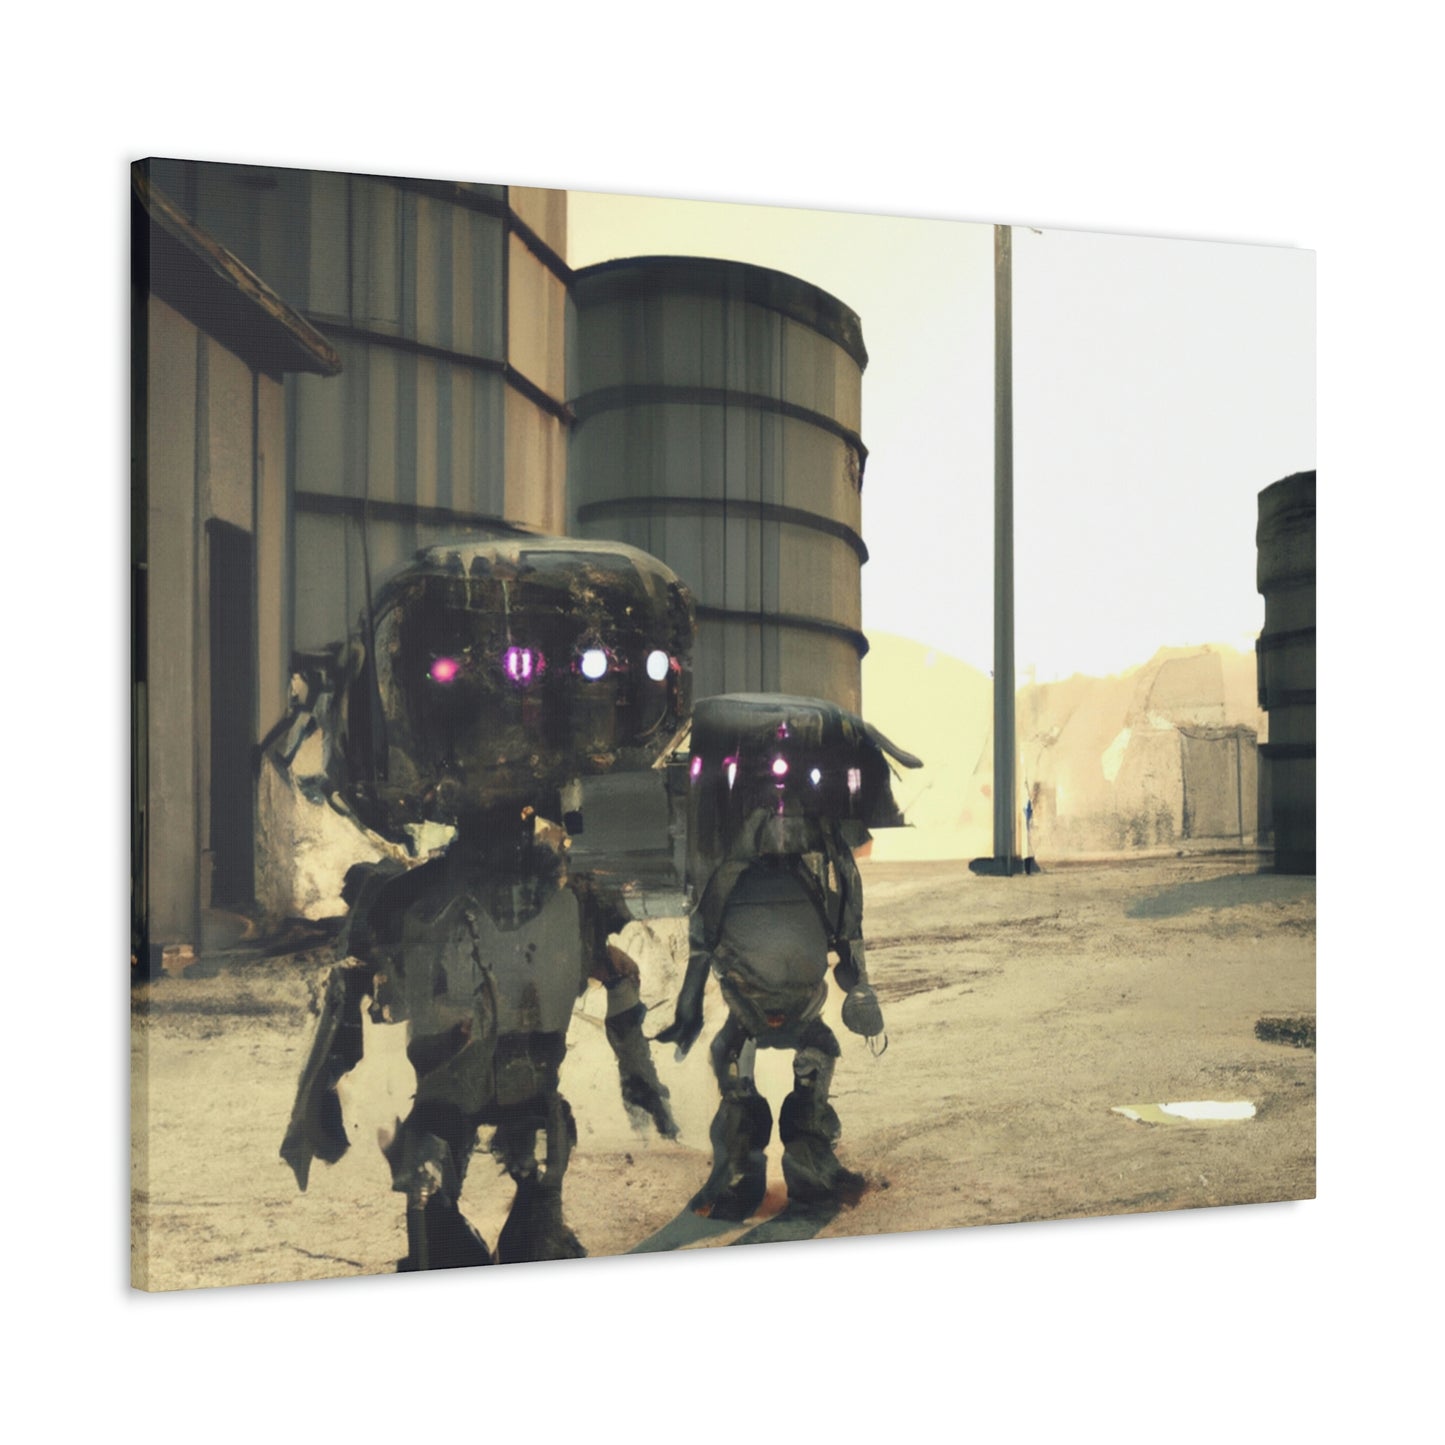 "Robotic Mystery in the Abandoned City" - The Alien Canva